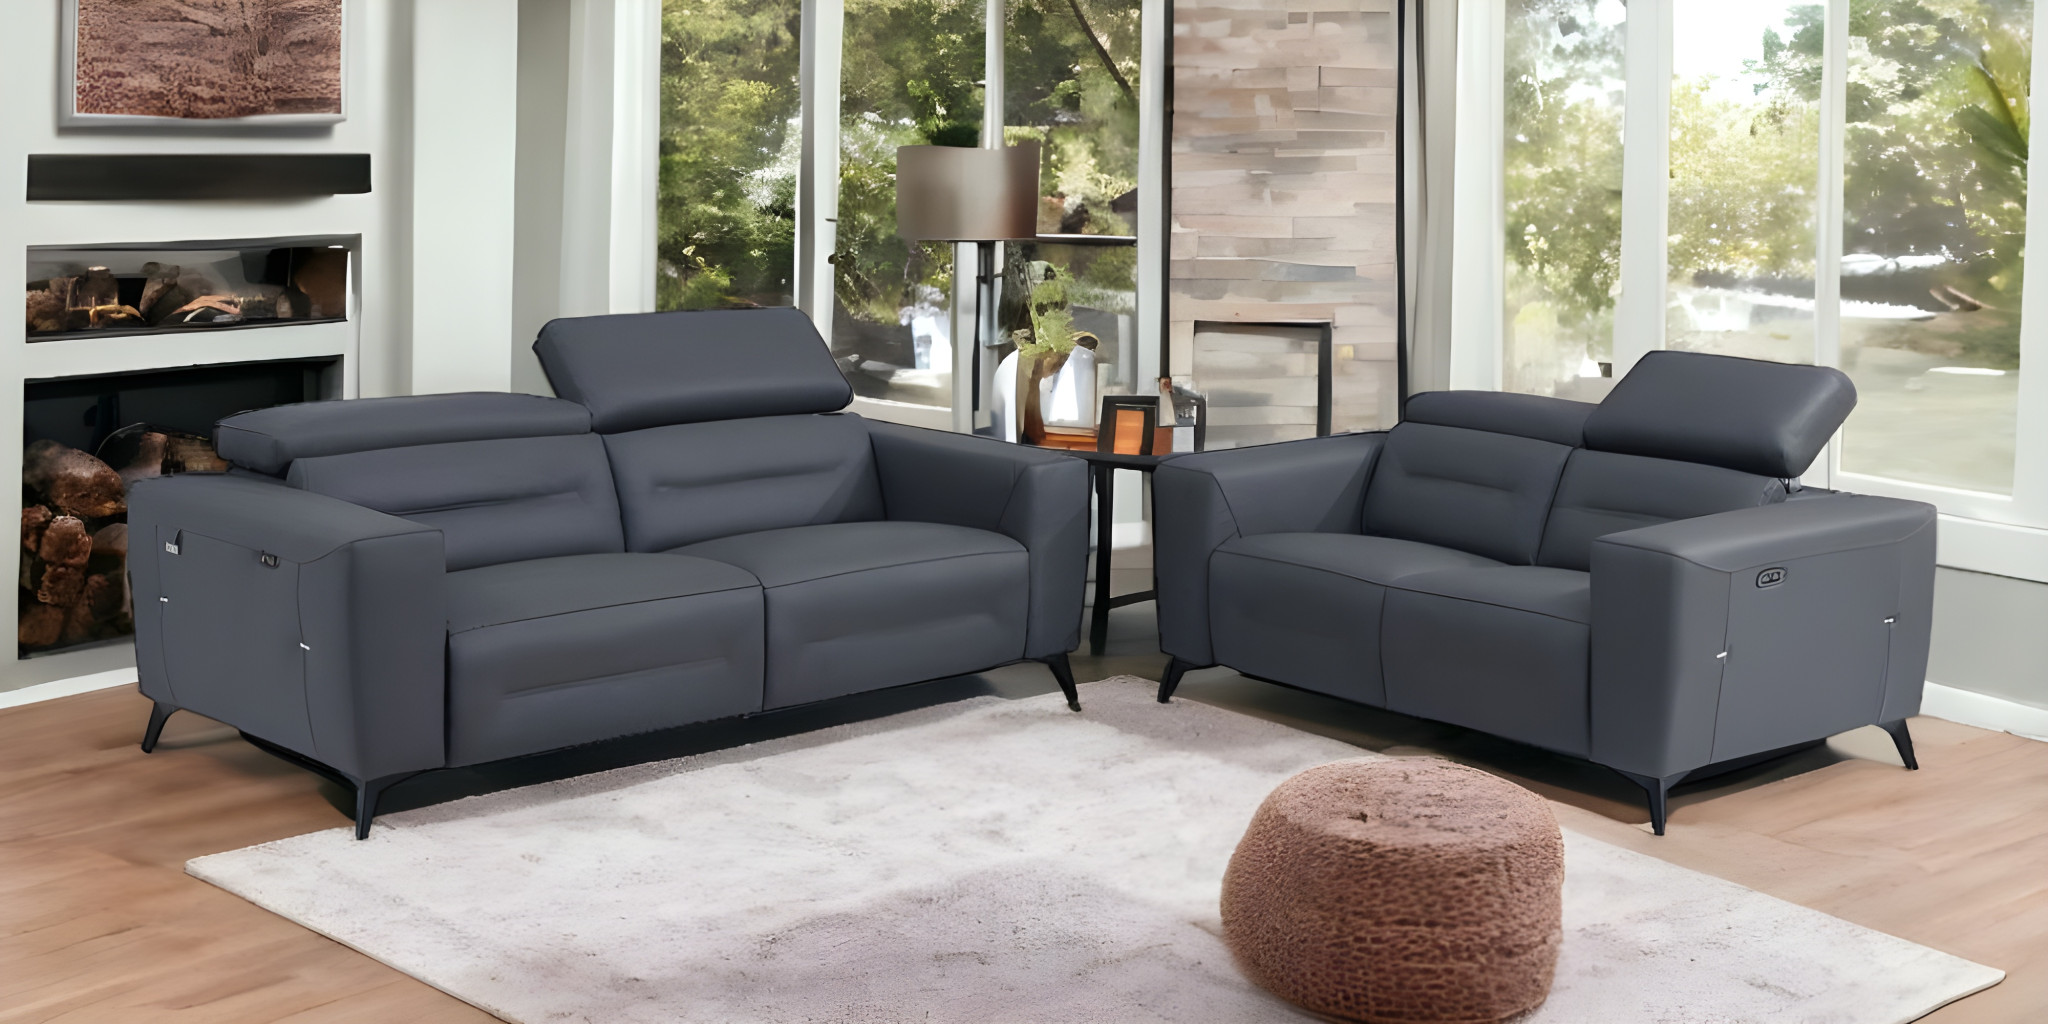 Two Piece Indoor Dark Gray Italian Leather Five Person Seating Set-480883-1